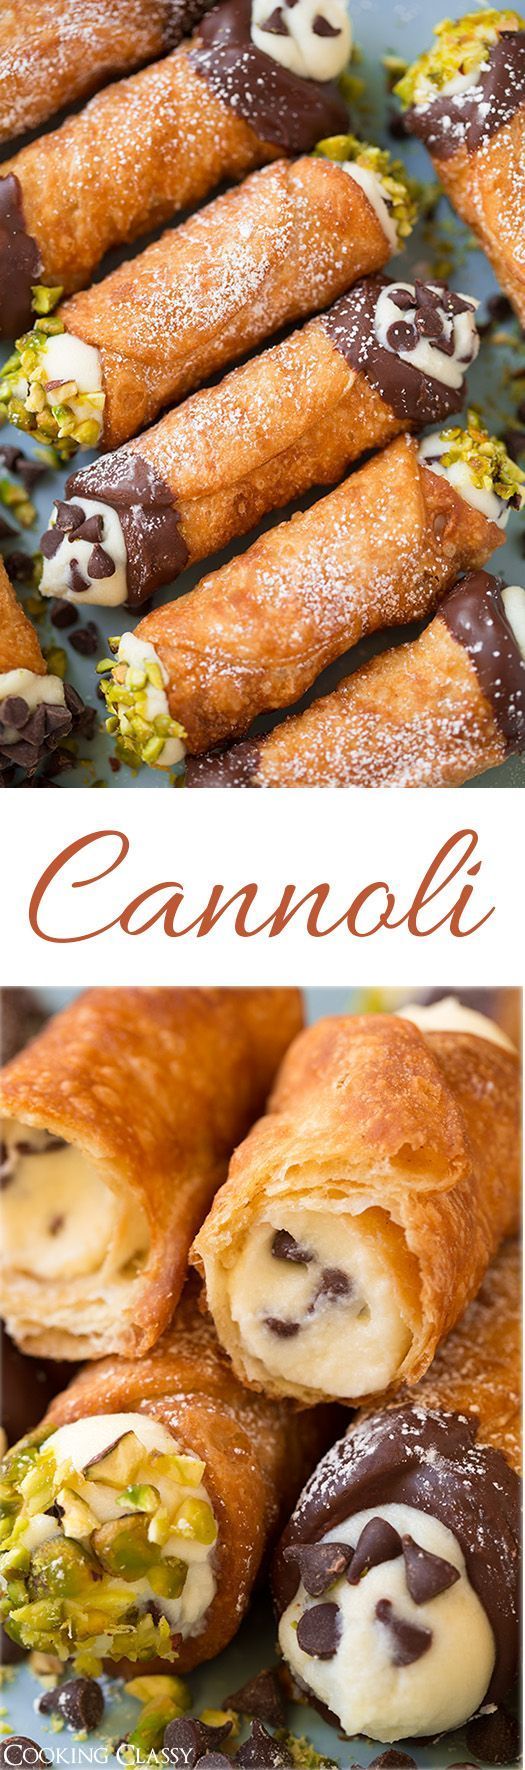 Cannoli (shell and filling recipes) – These are seriously dreamy! Perfectly crisp shell and deliciously creamy filling. Just like